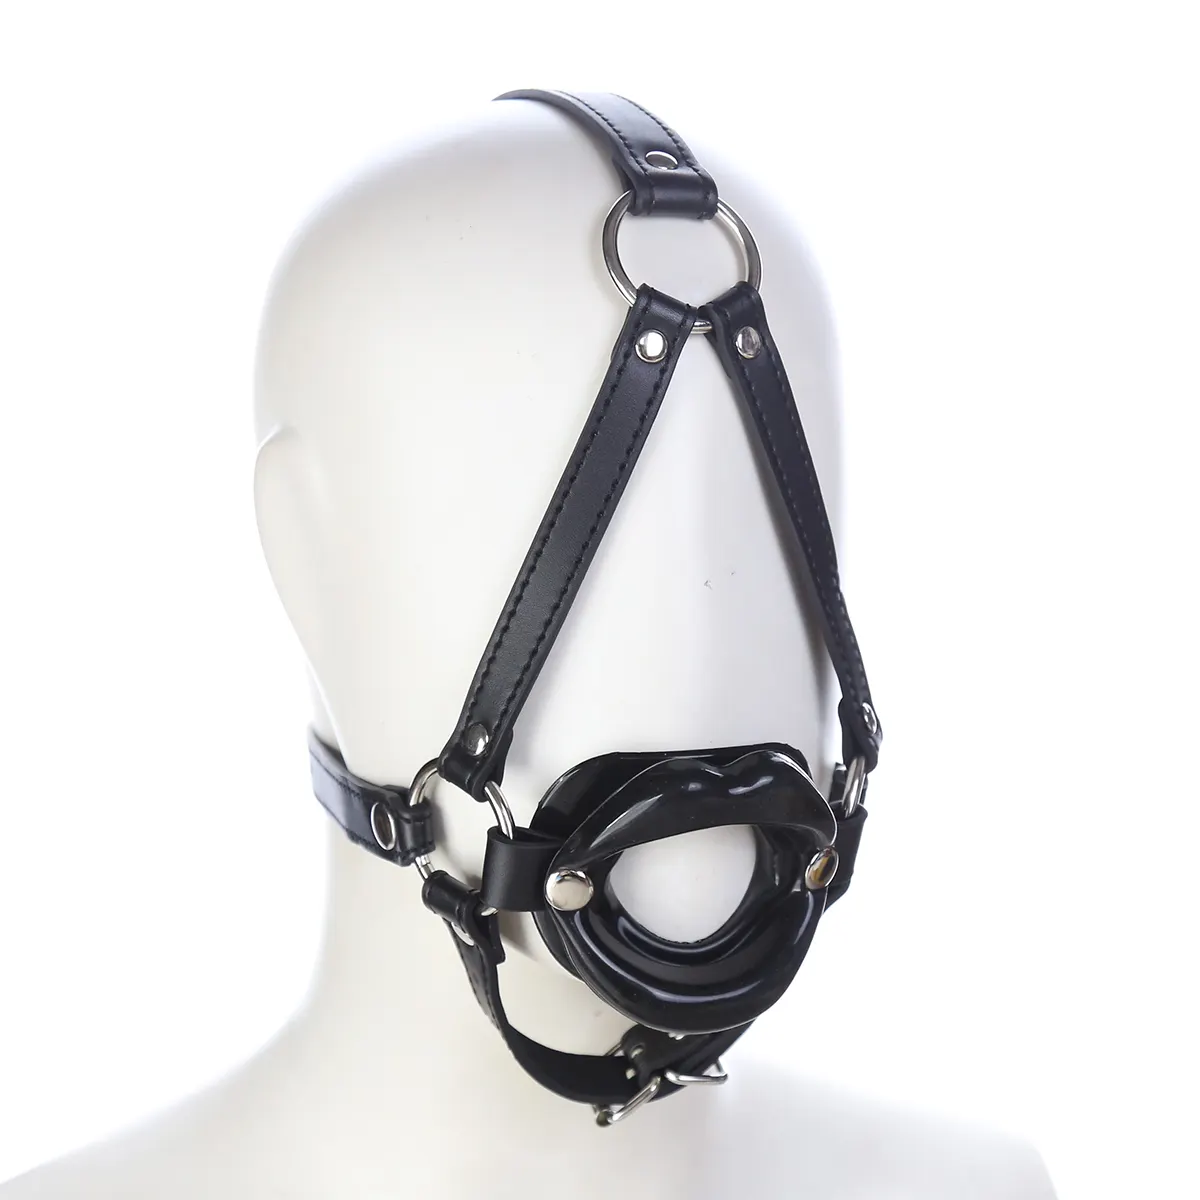 Aimitoy SM Game Bondage Sex Toy Bdsm Mouth Opener Head Mouth Ball Gag Retractor Head Harness